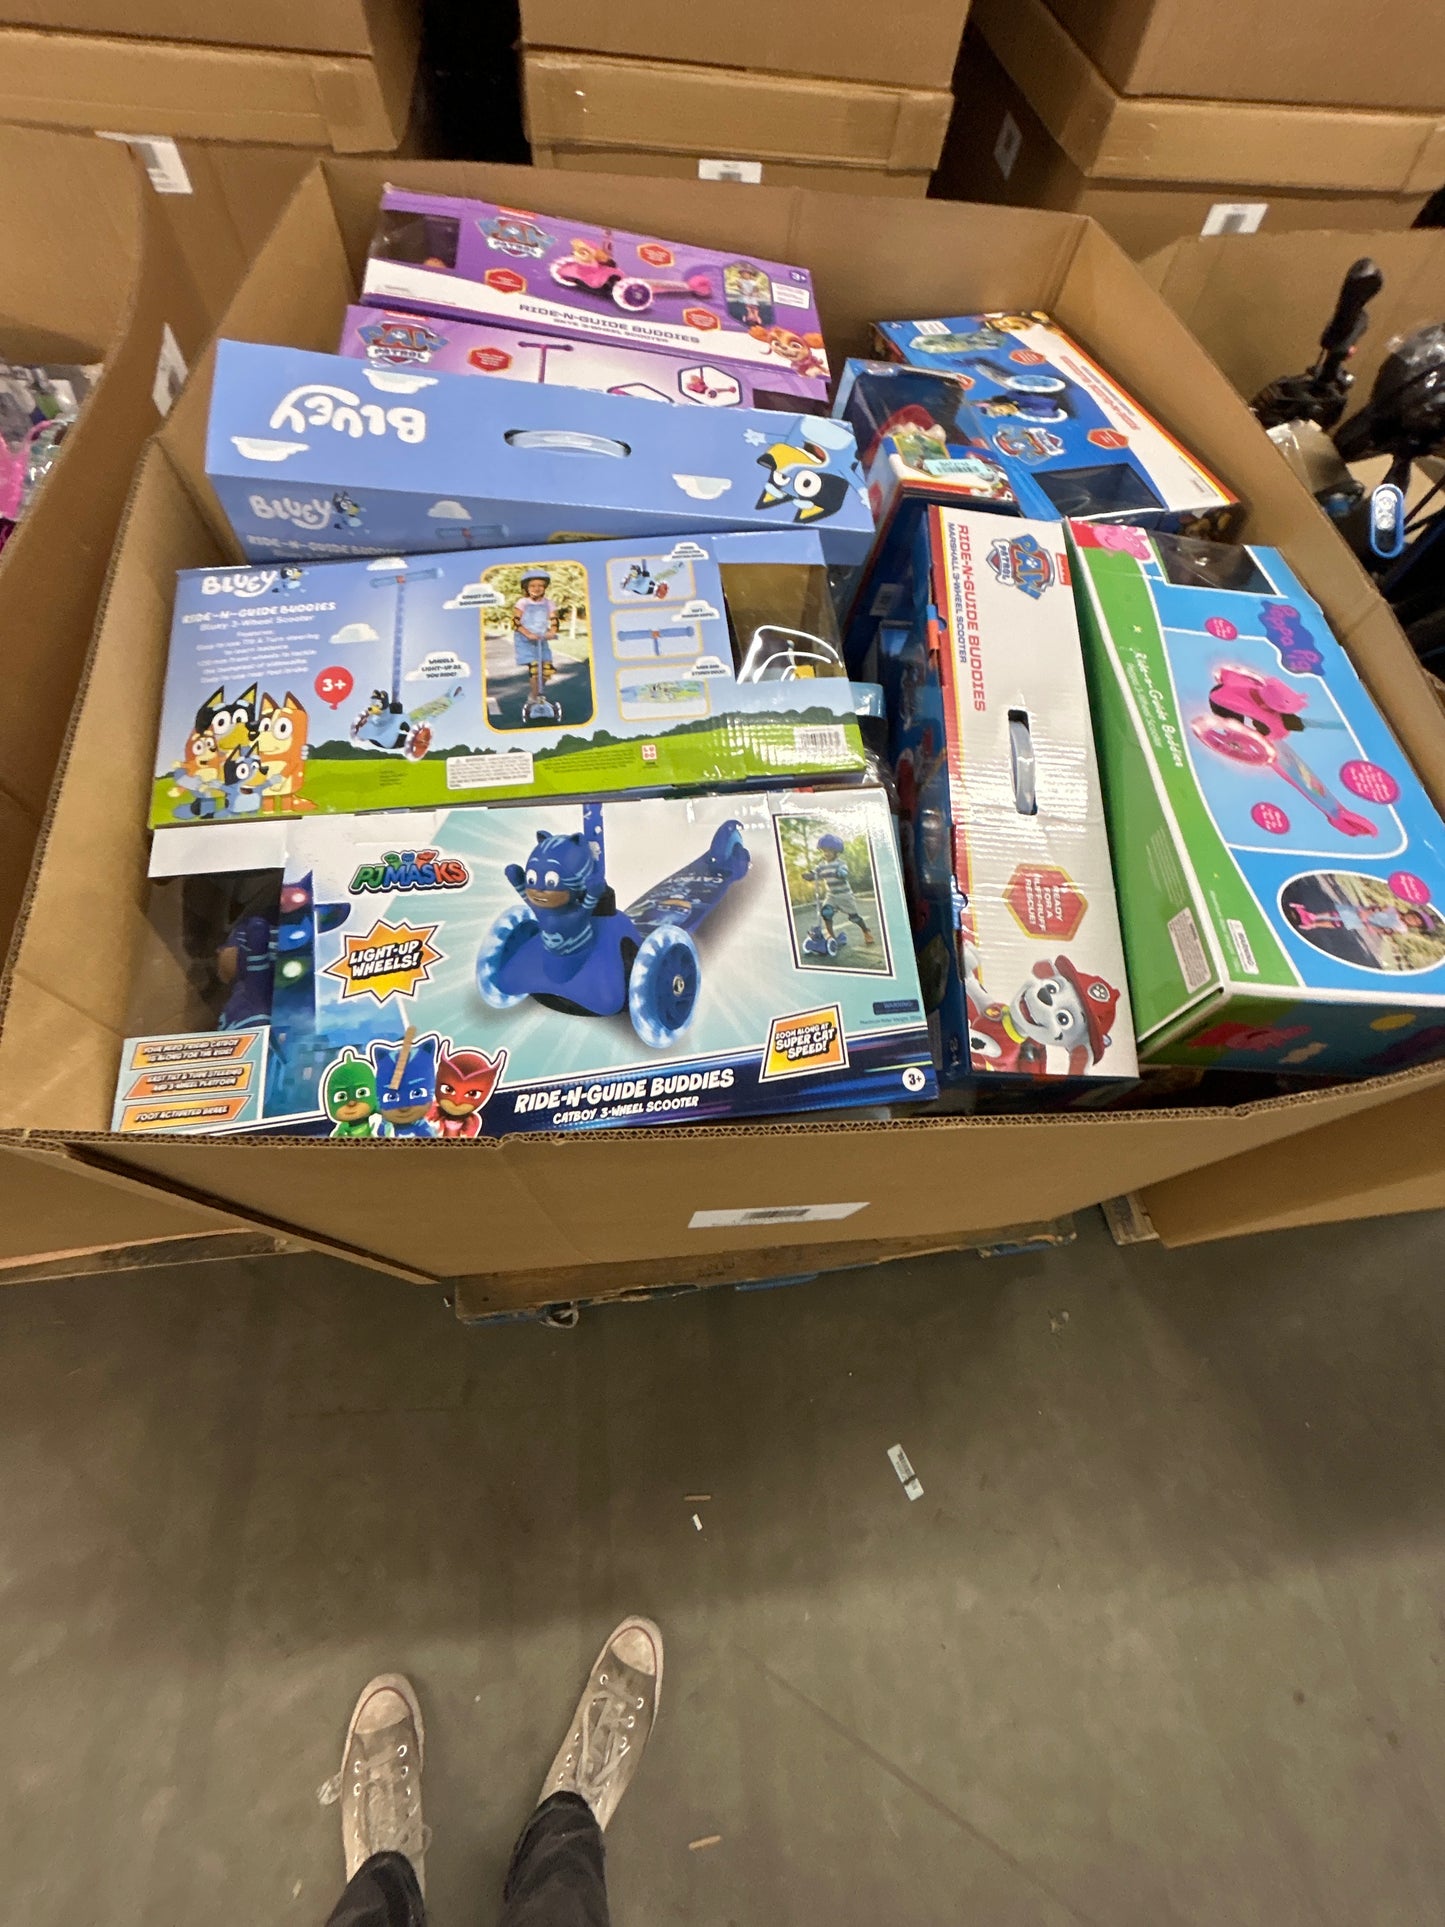 Liquidation Pallet of Toys and Gaming Accessories, Pallet-VL